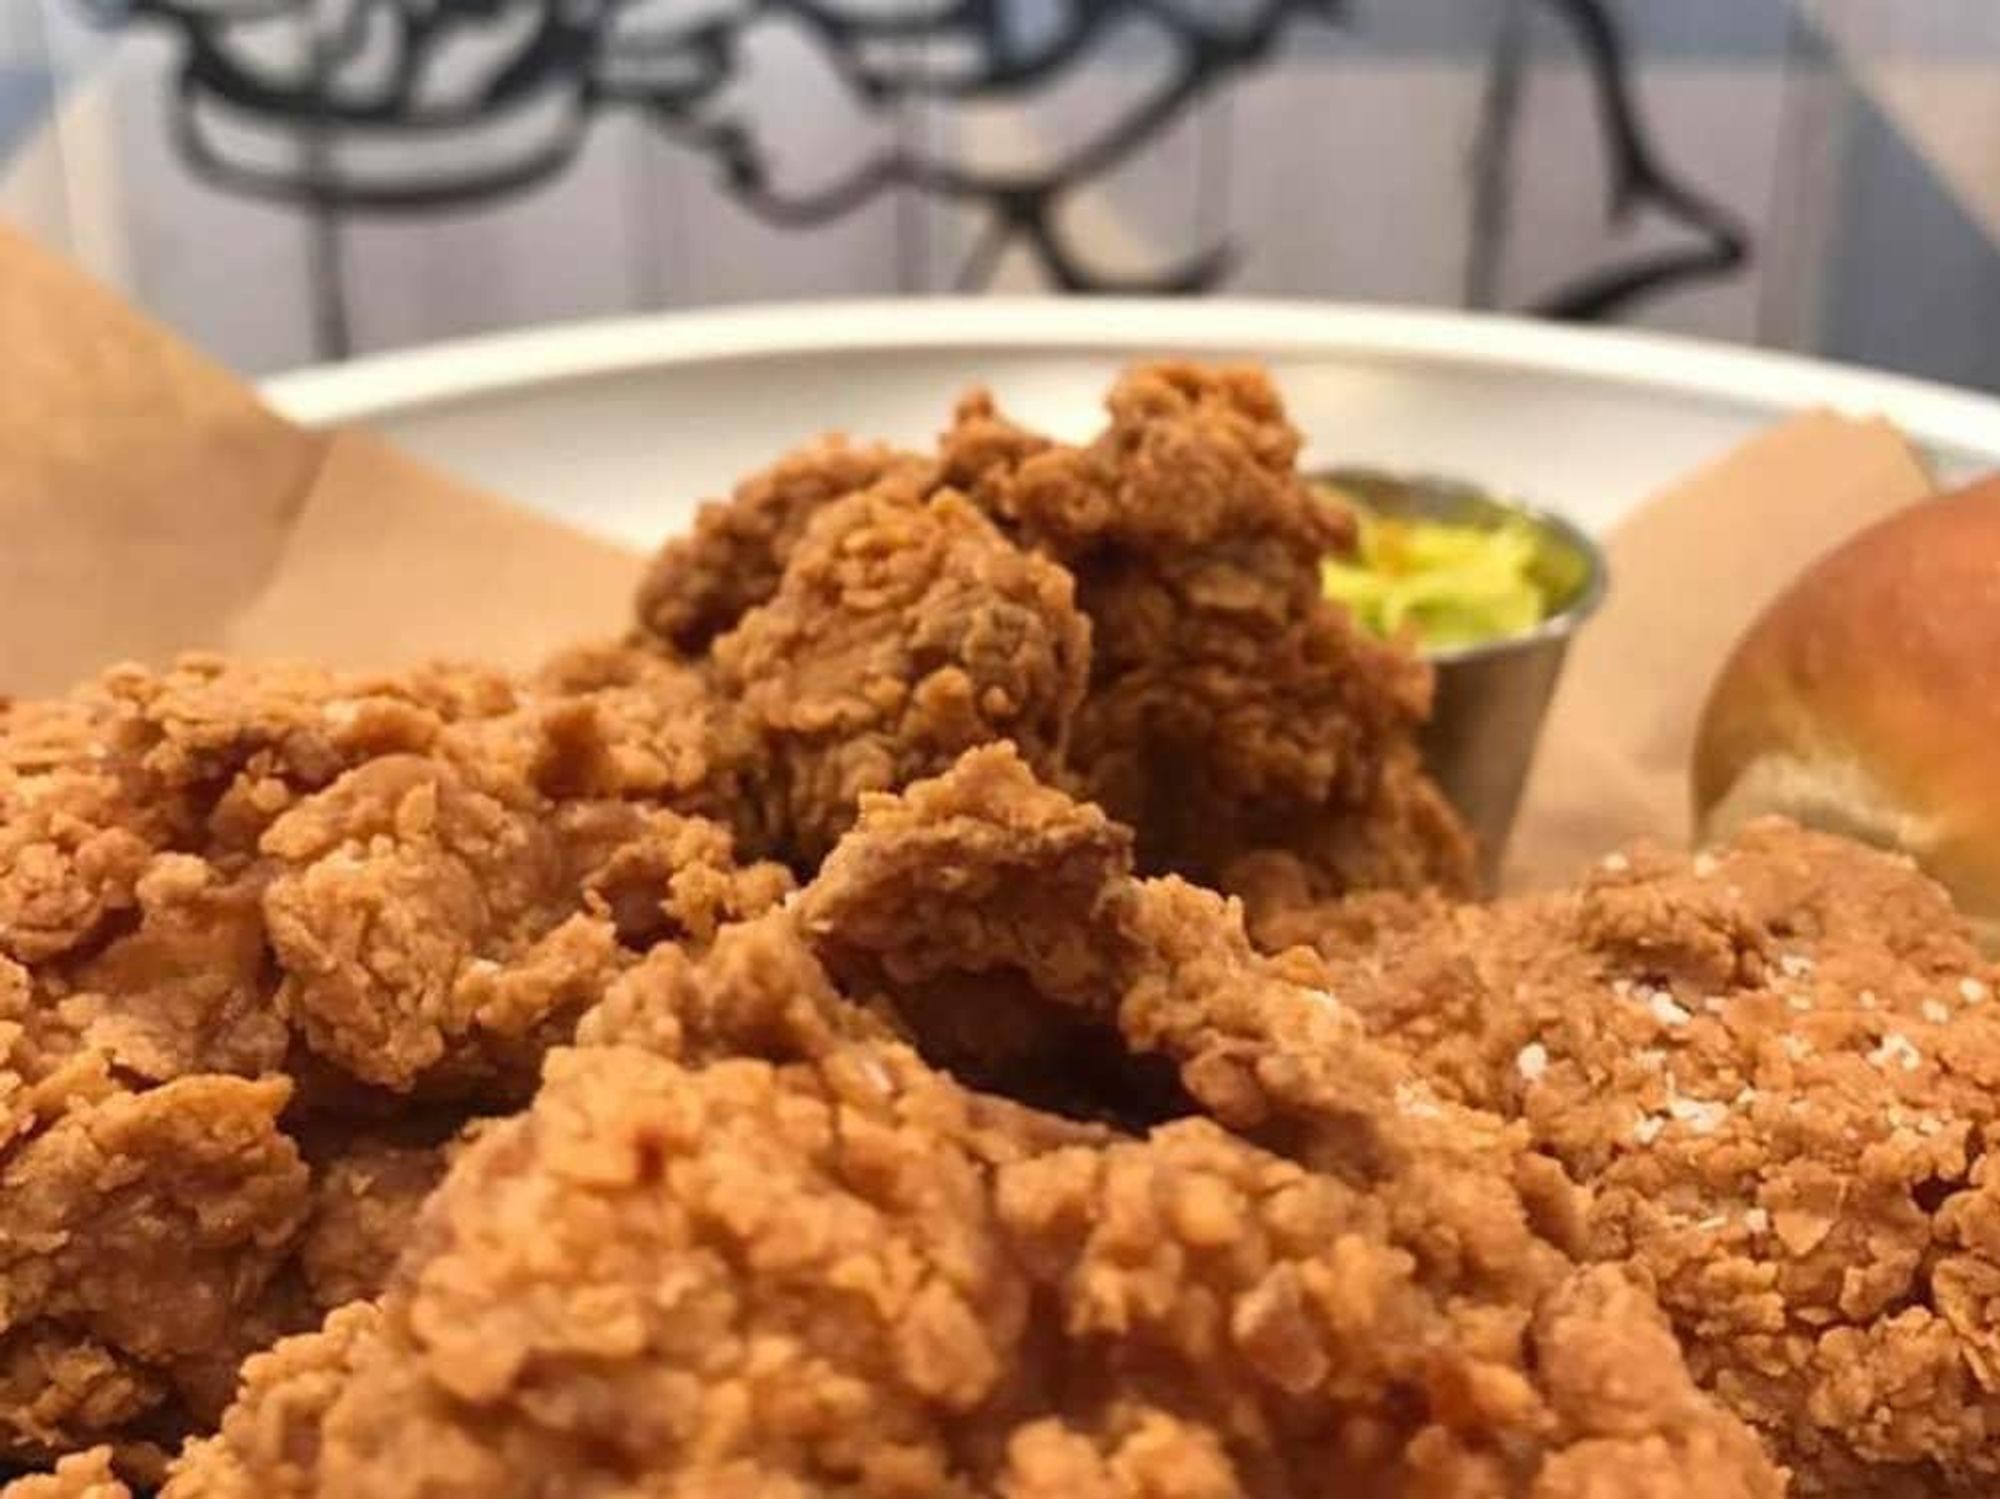 JT Youngblood's fried chicken